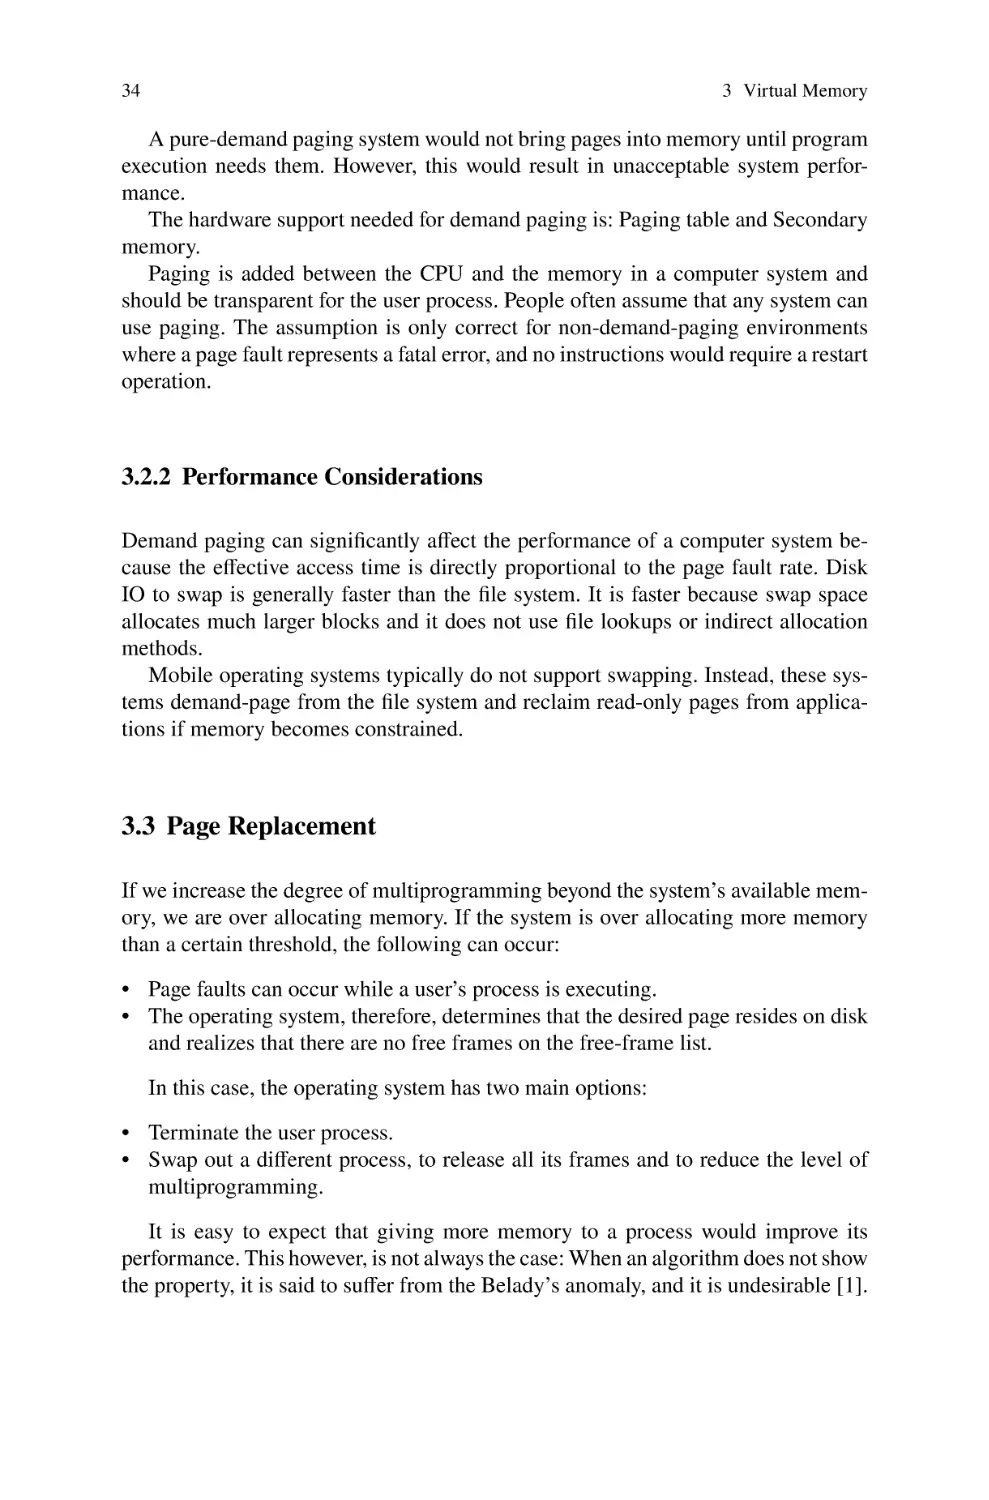 3.2.2 Performance Considerations
3.3 Page Replacement